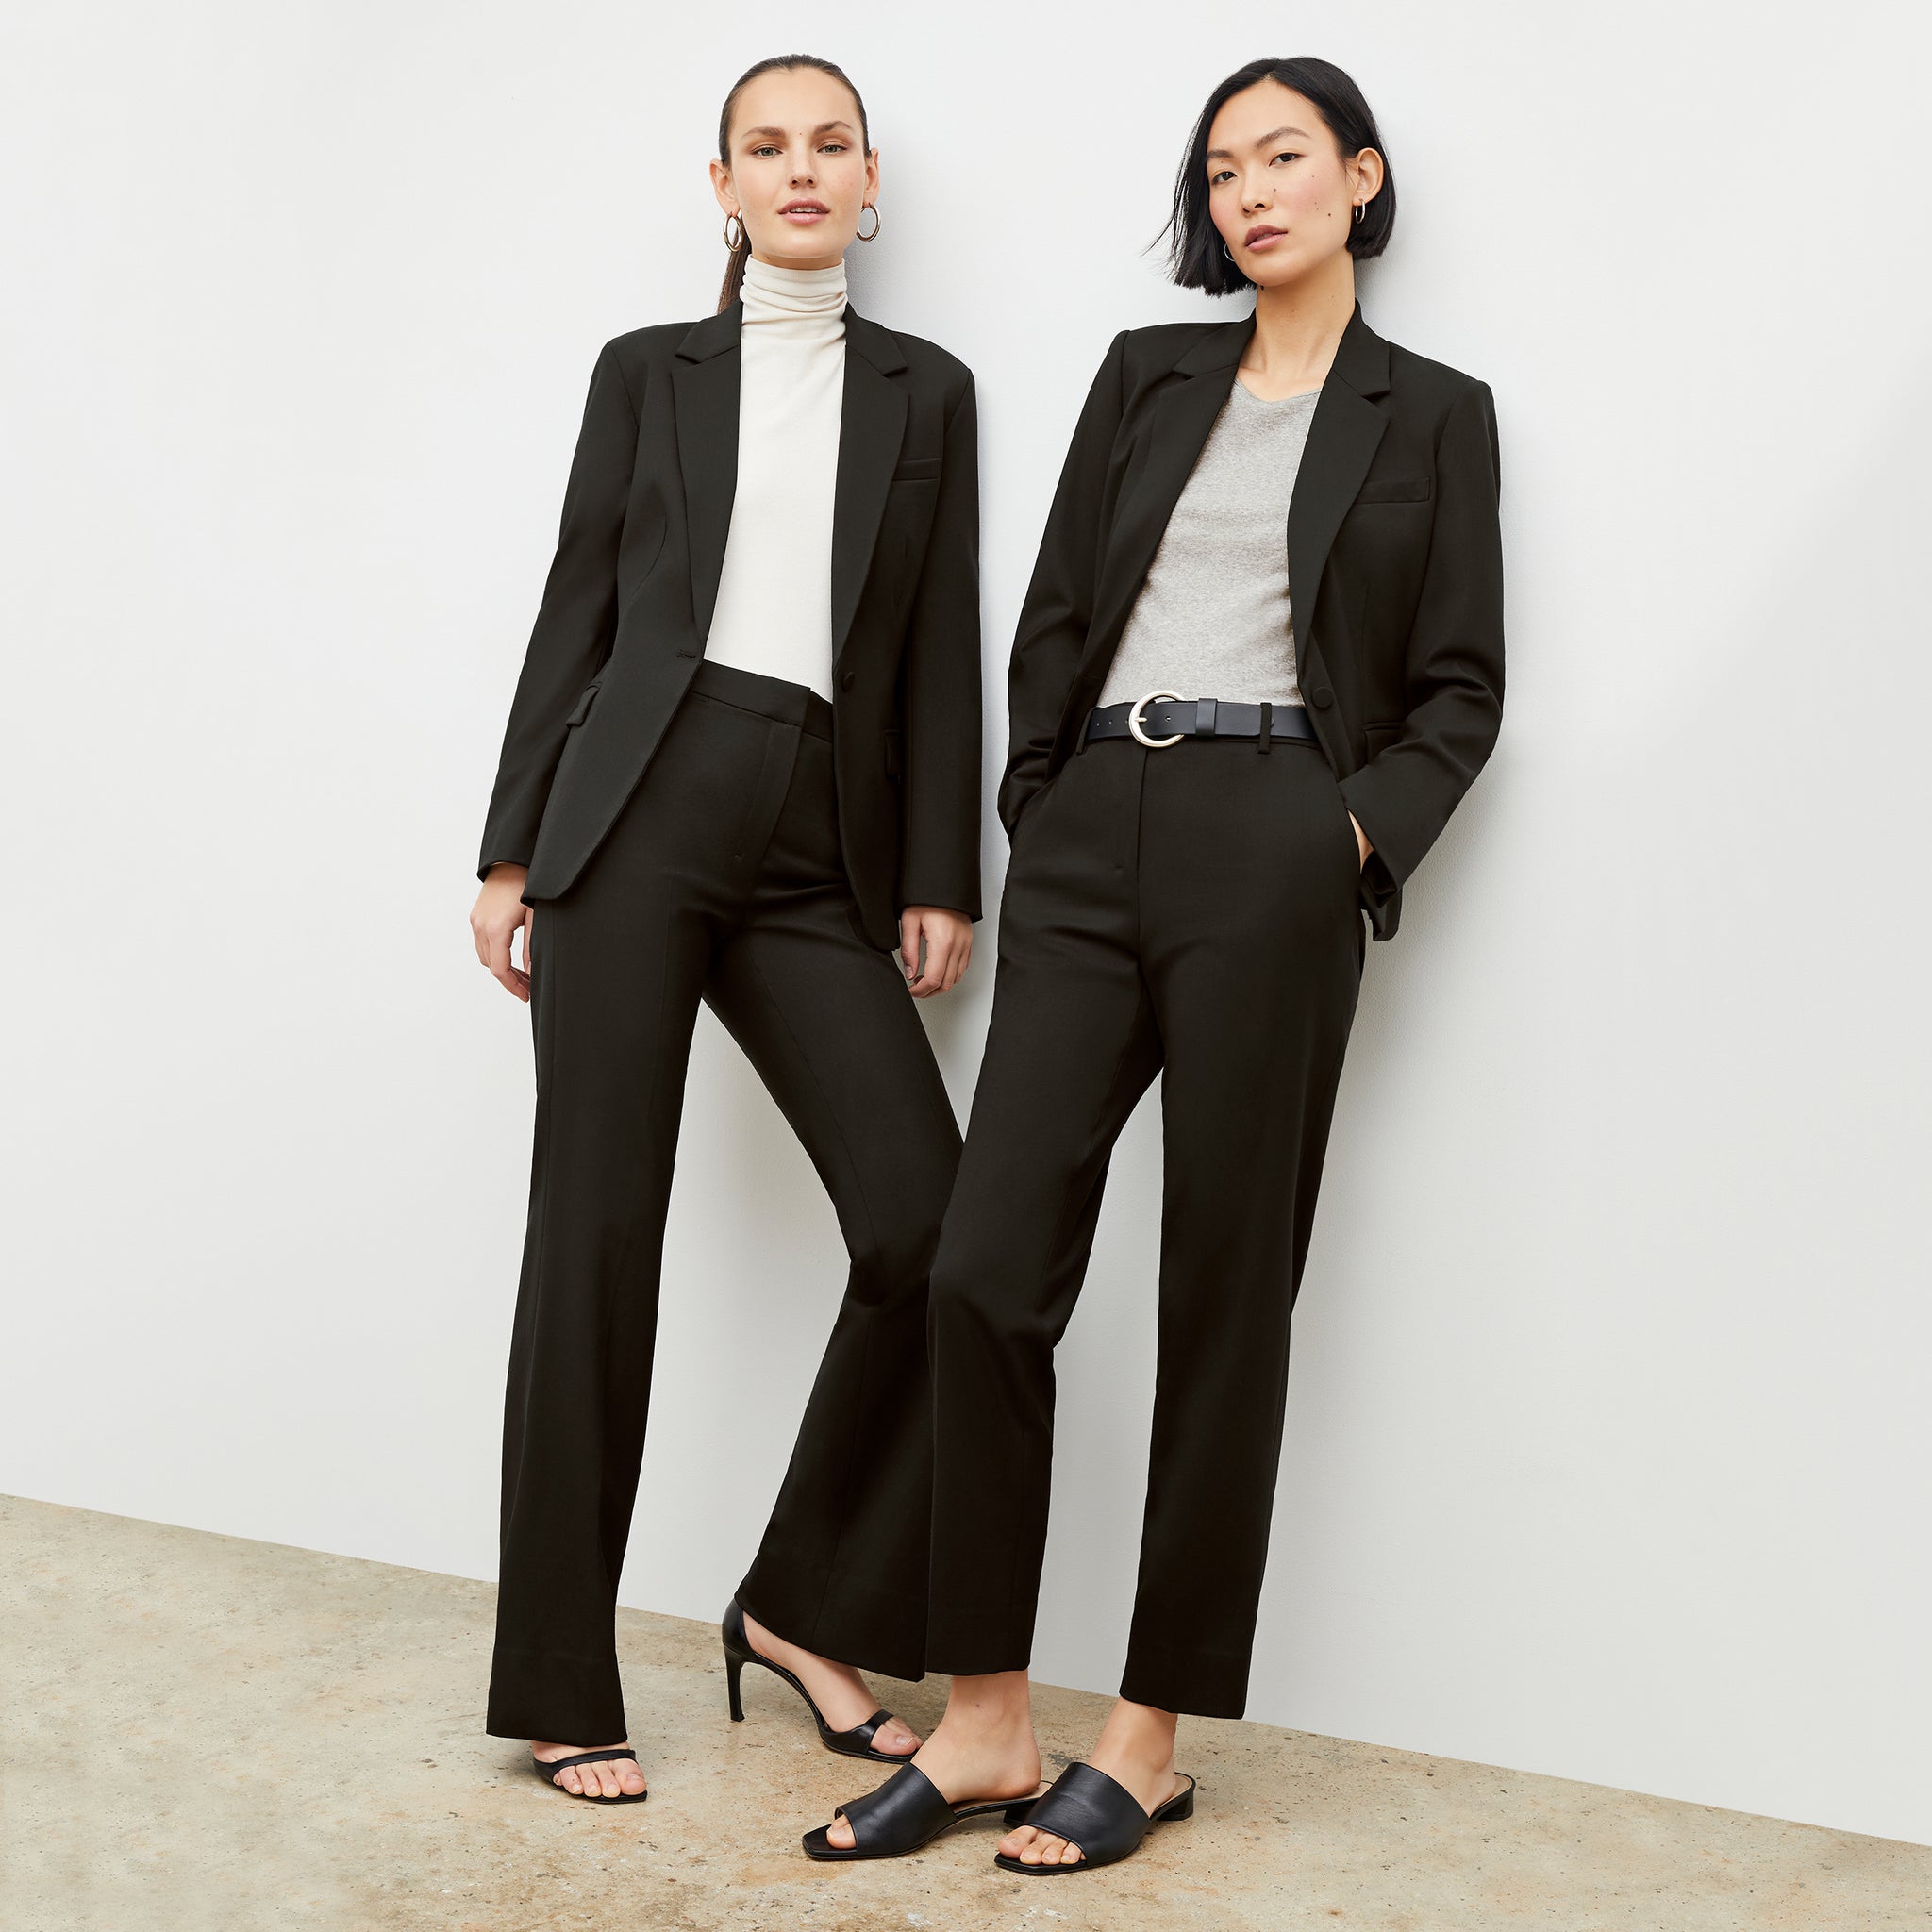 Front image of a woman wearing the Yiyan Blazer Short in Black and a woman wearing the Yiyan Blazer in Black